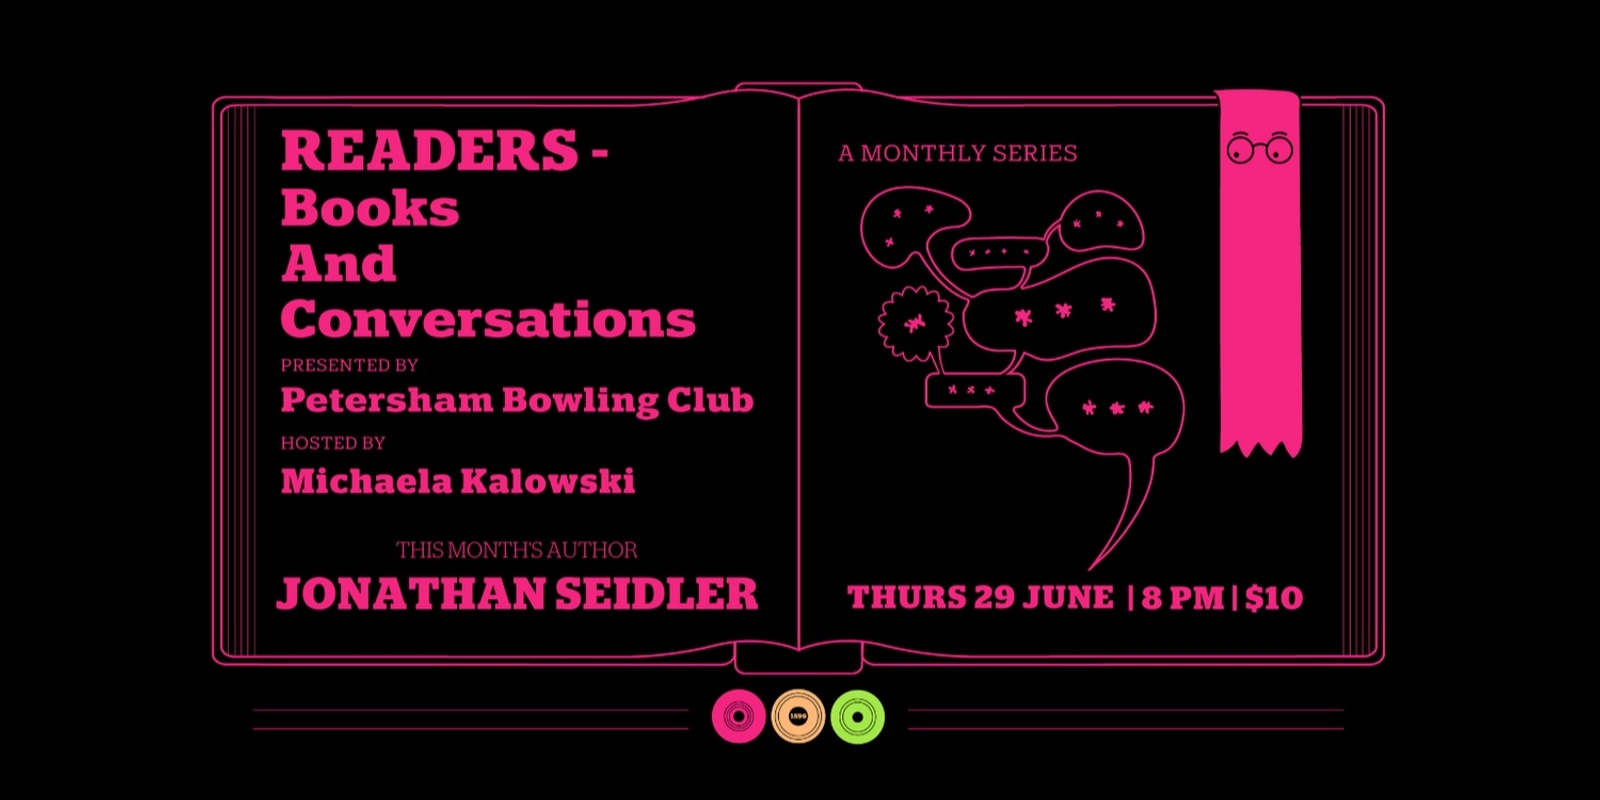 READERS - Books and Conversations w/ Jonathan Seidler 